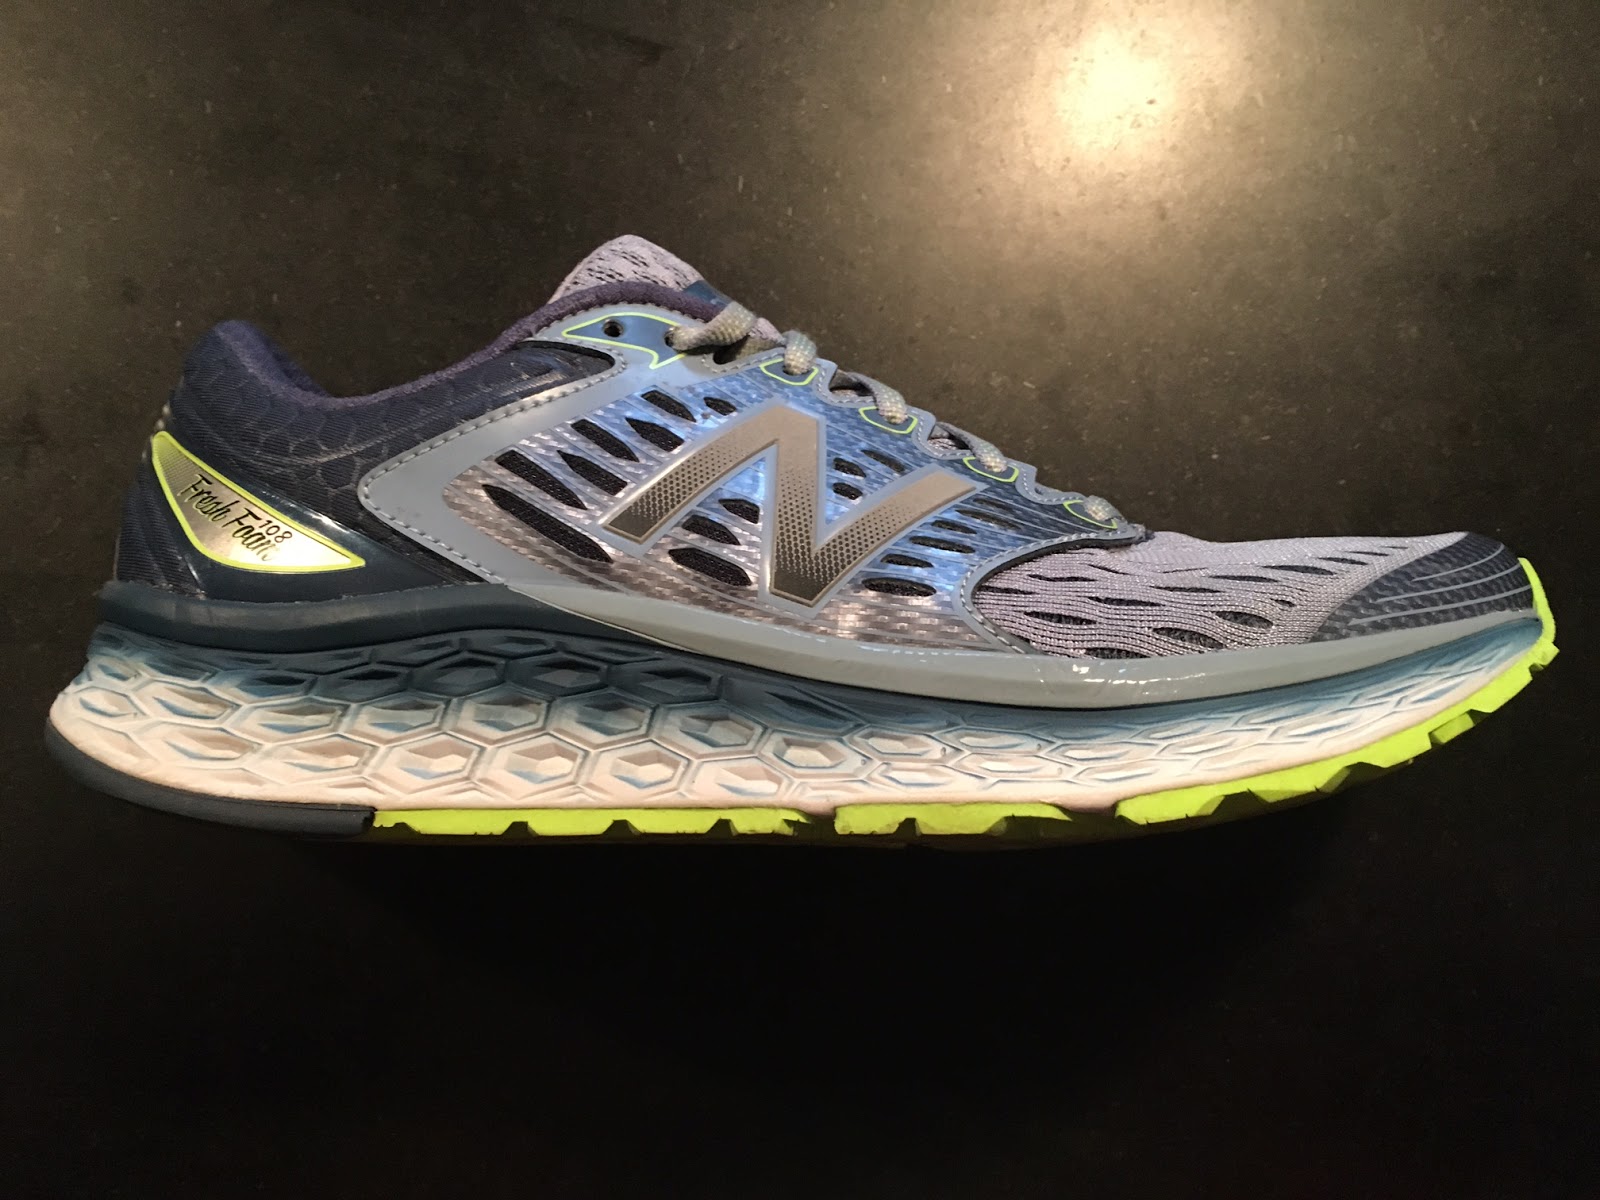 Road Trail Run: Review- New Balance Fresh Foam Softer, Smoother Premium Ride to Fresh Foam